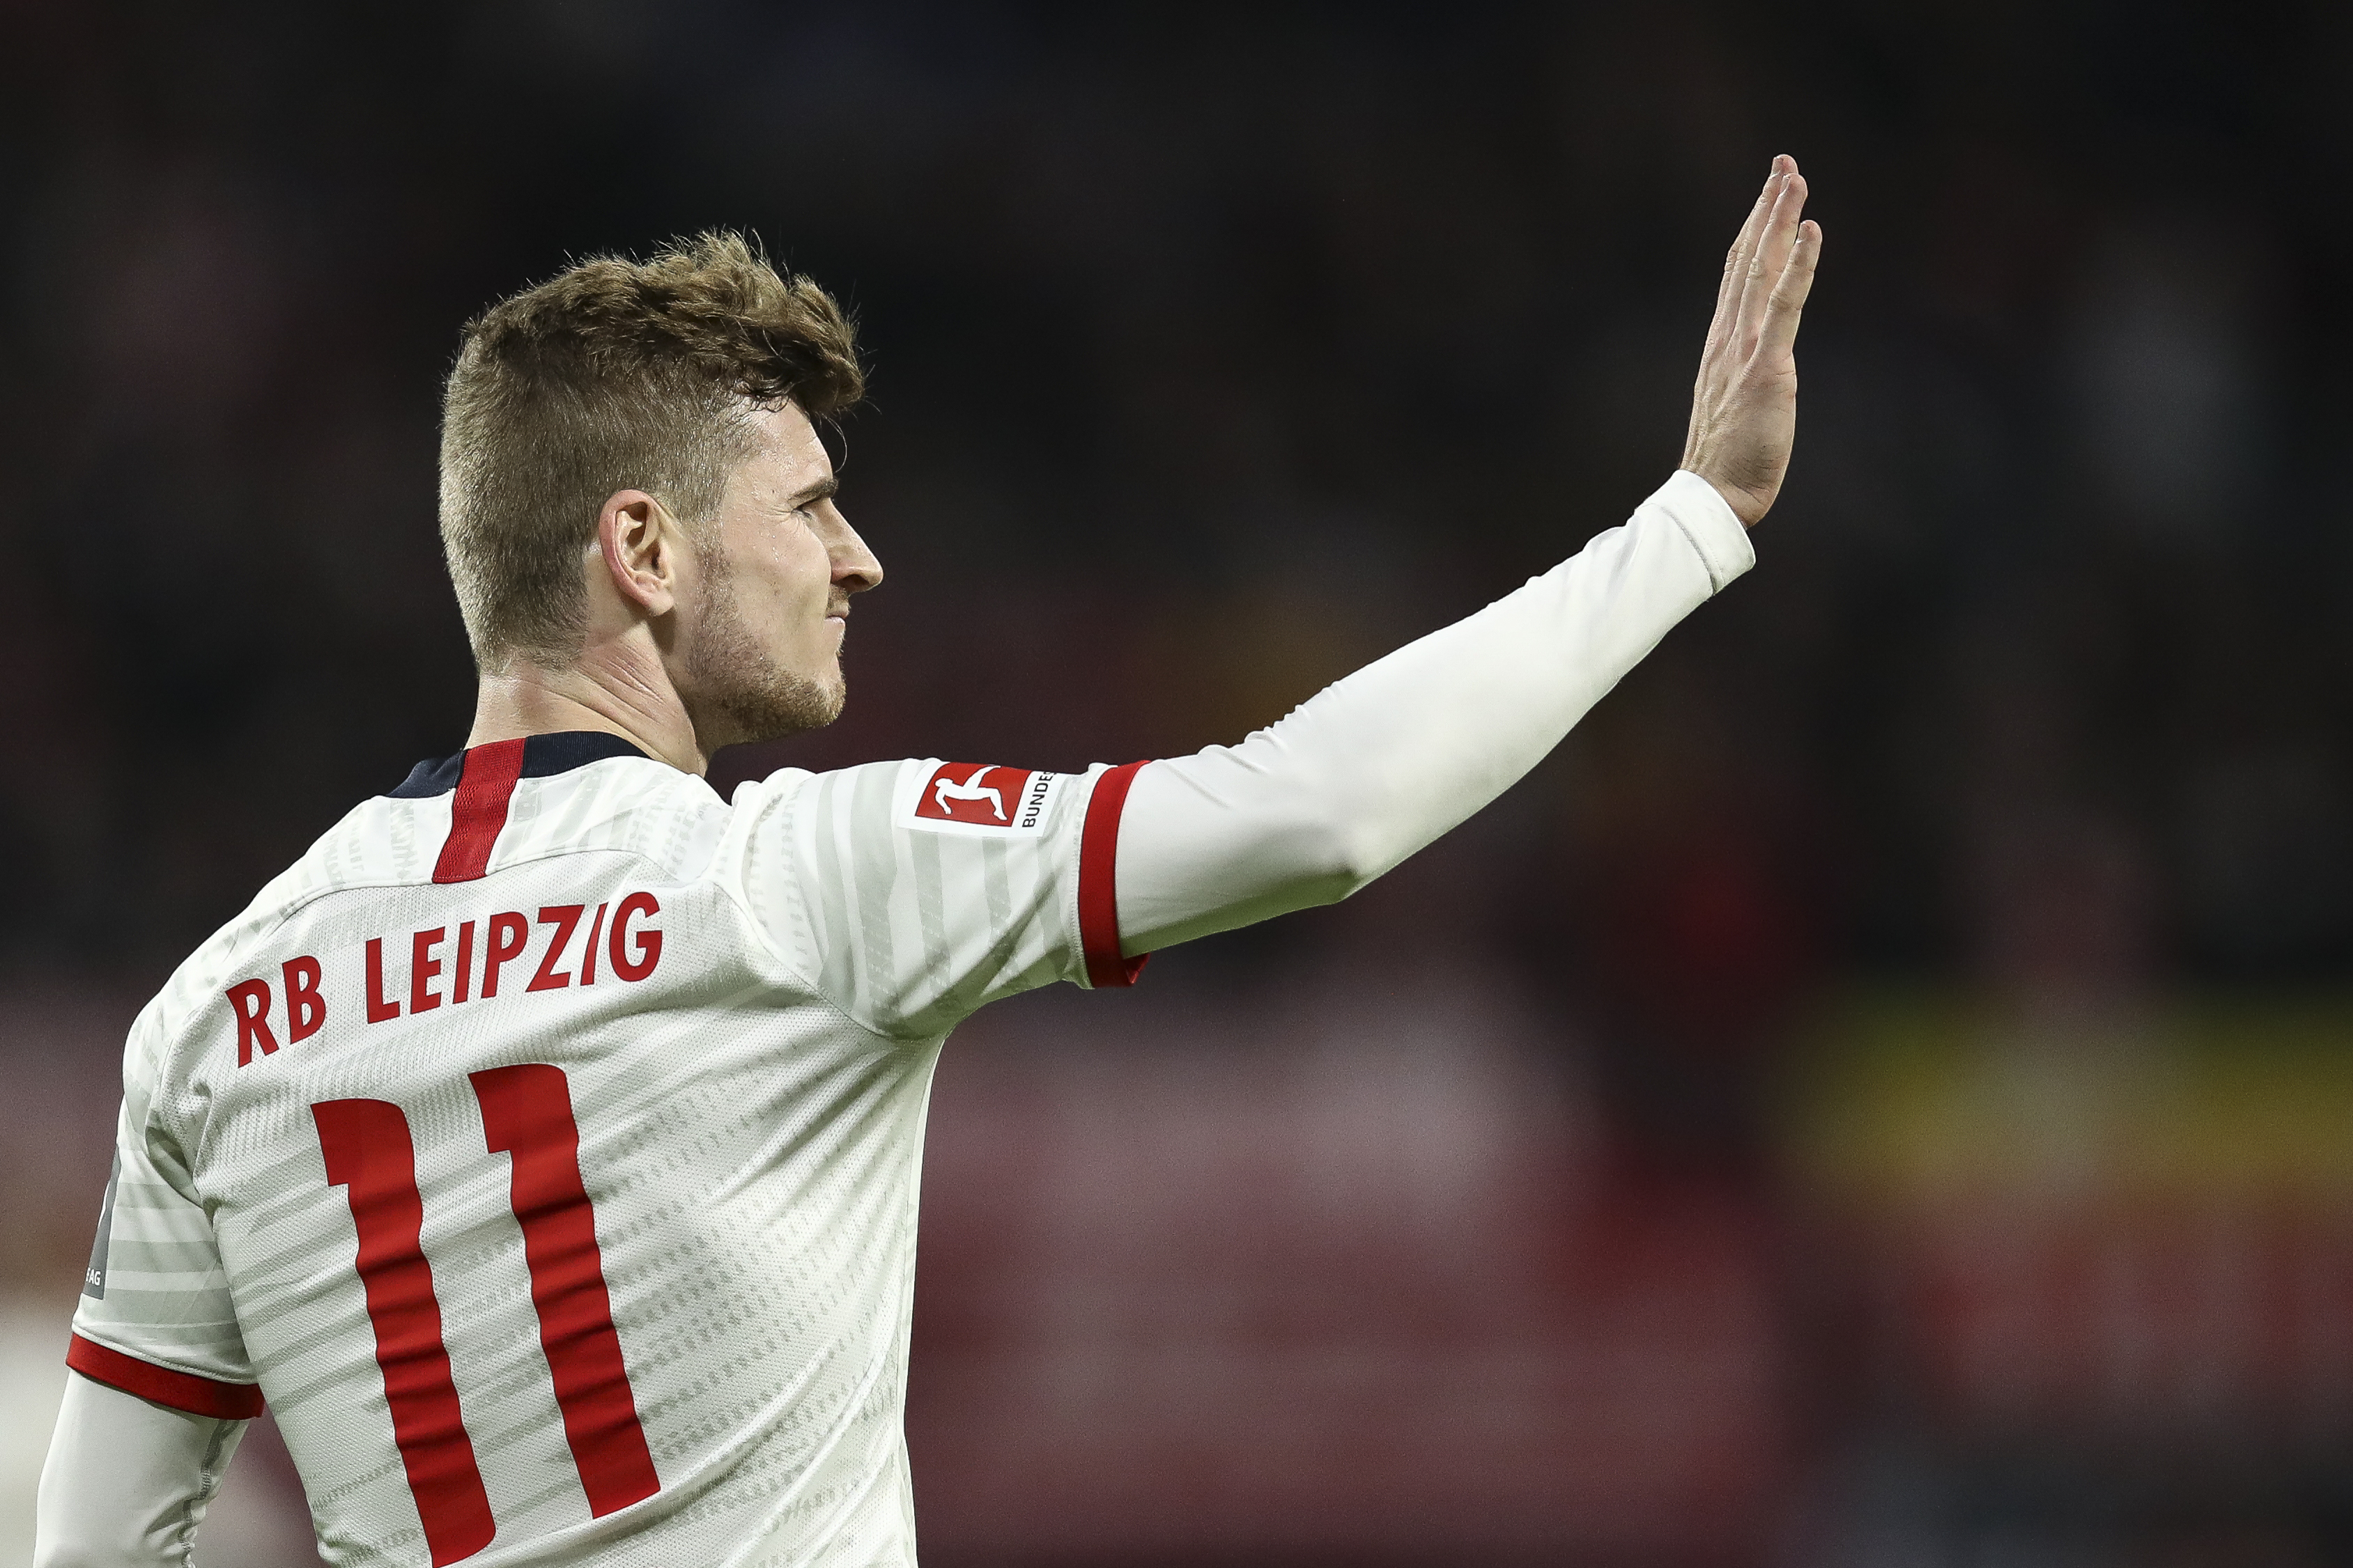 Werner will soon be bidding goodbye to RB Leipzig soon (Photo by Maja Hitij/Bongarts/Getty Images)